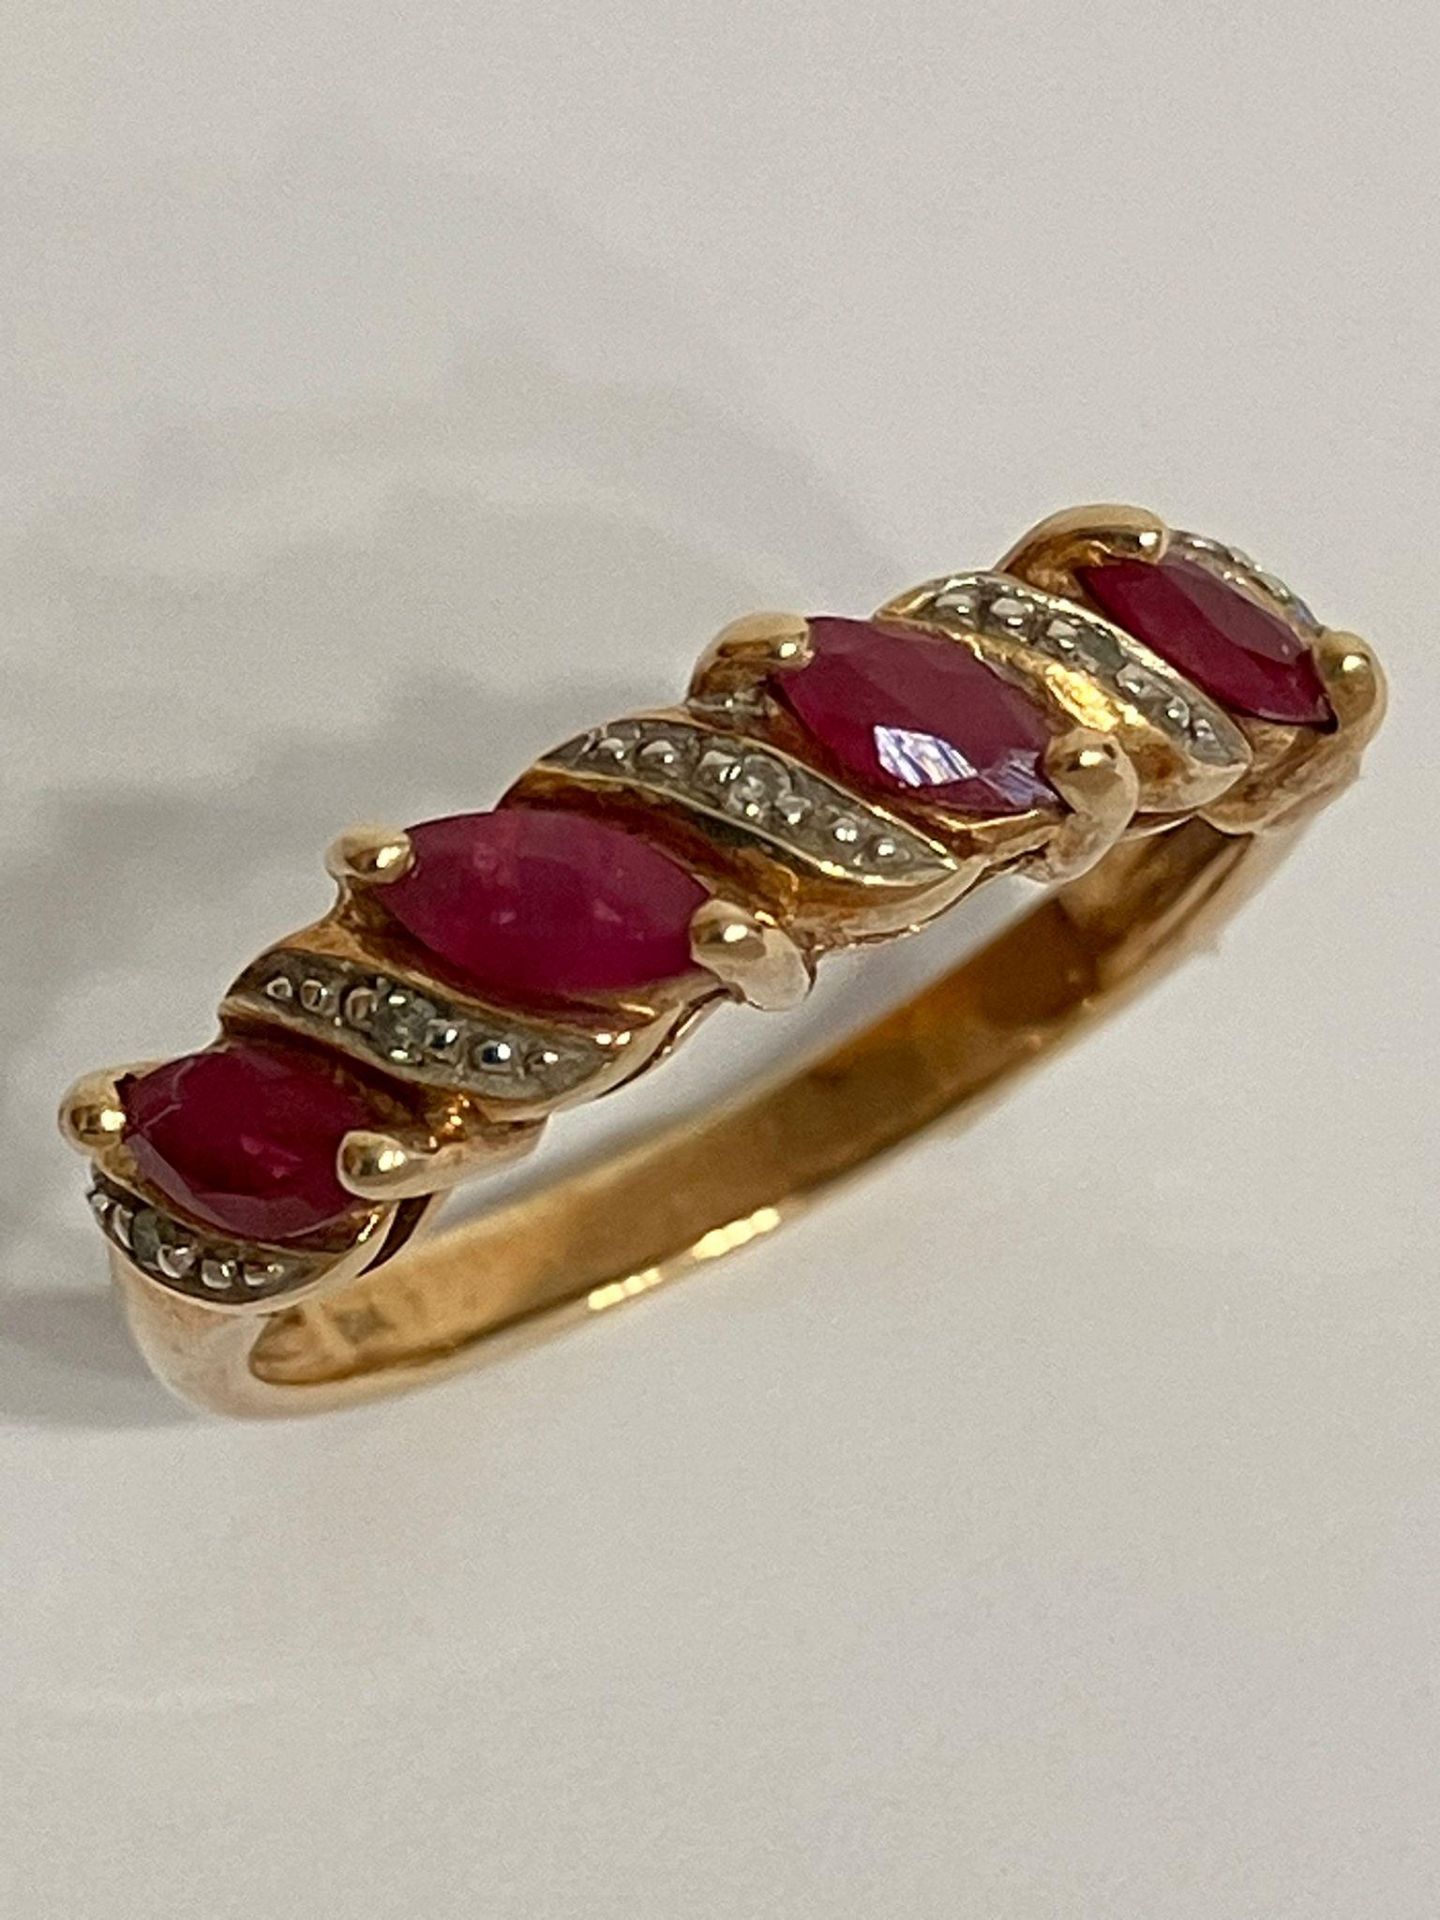 Classic 9 carat GOLD RUBY and DIAMOND RING. having Rubies and Diamonds sweep mounted. Full UK